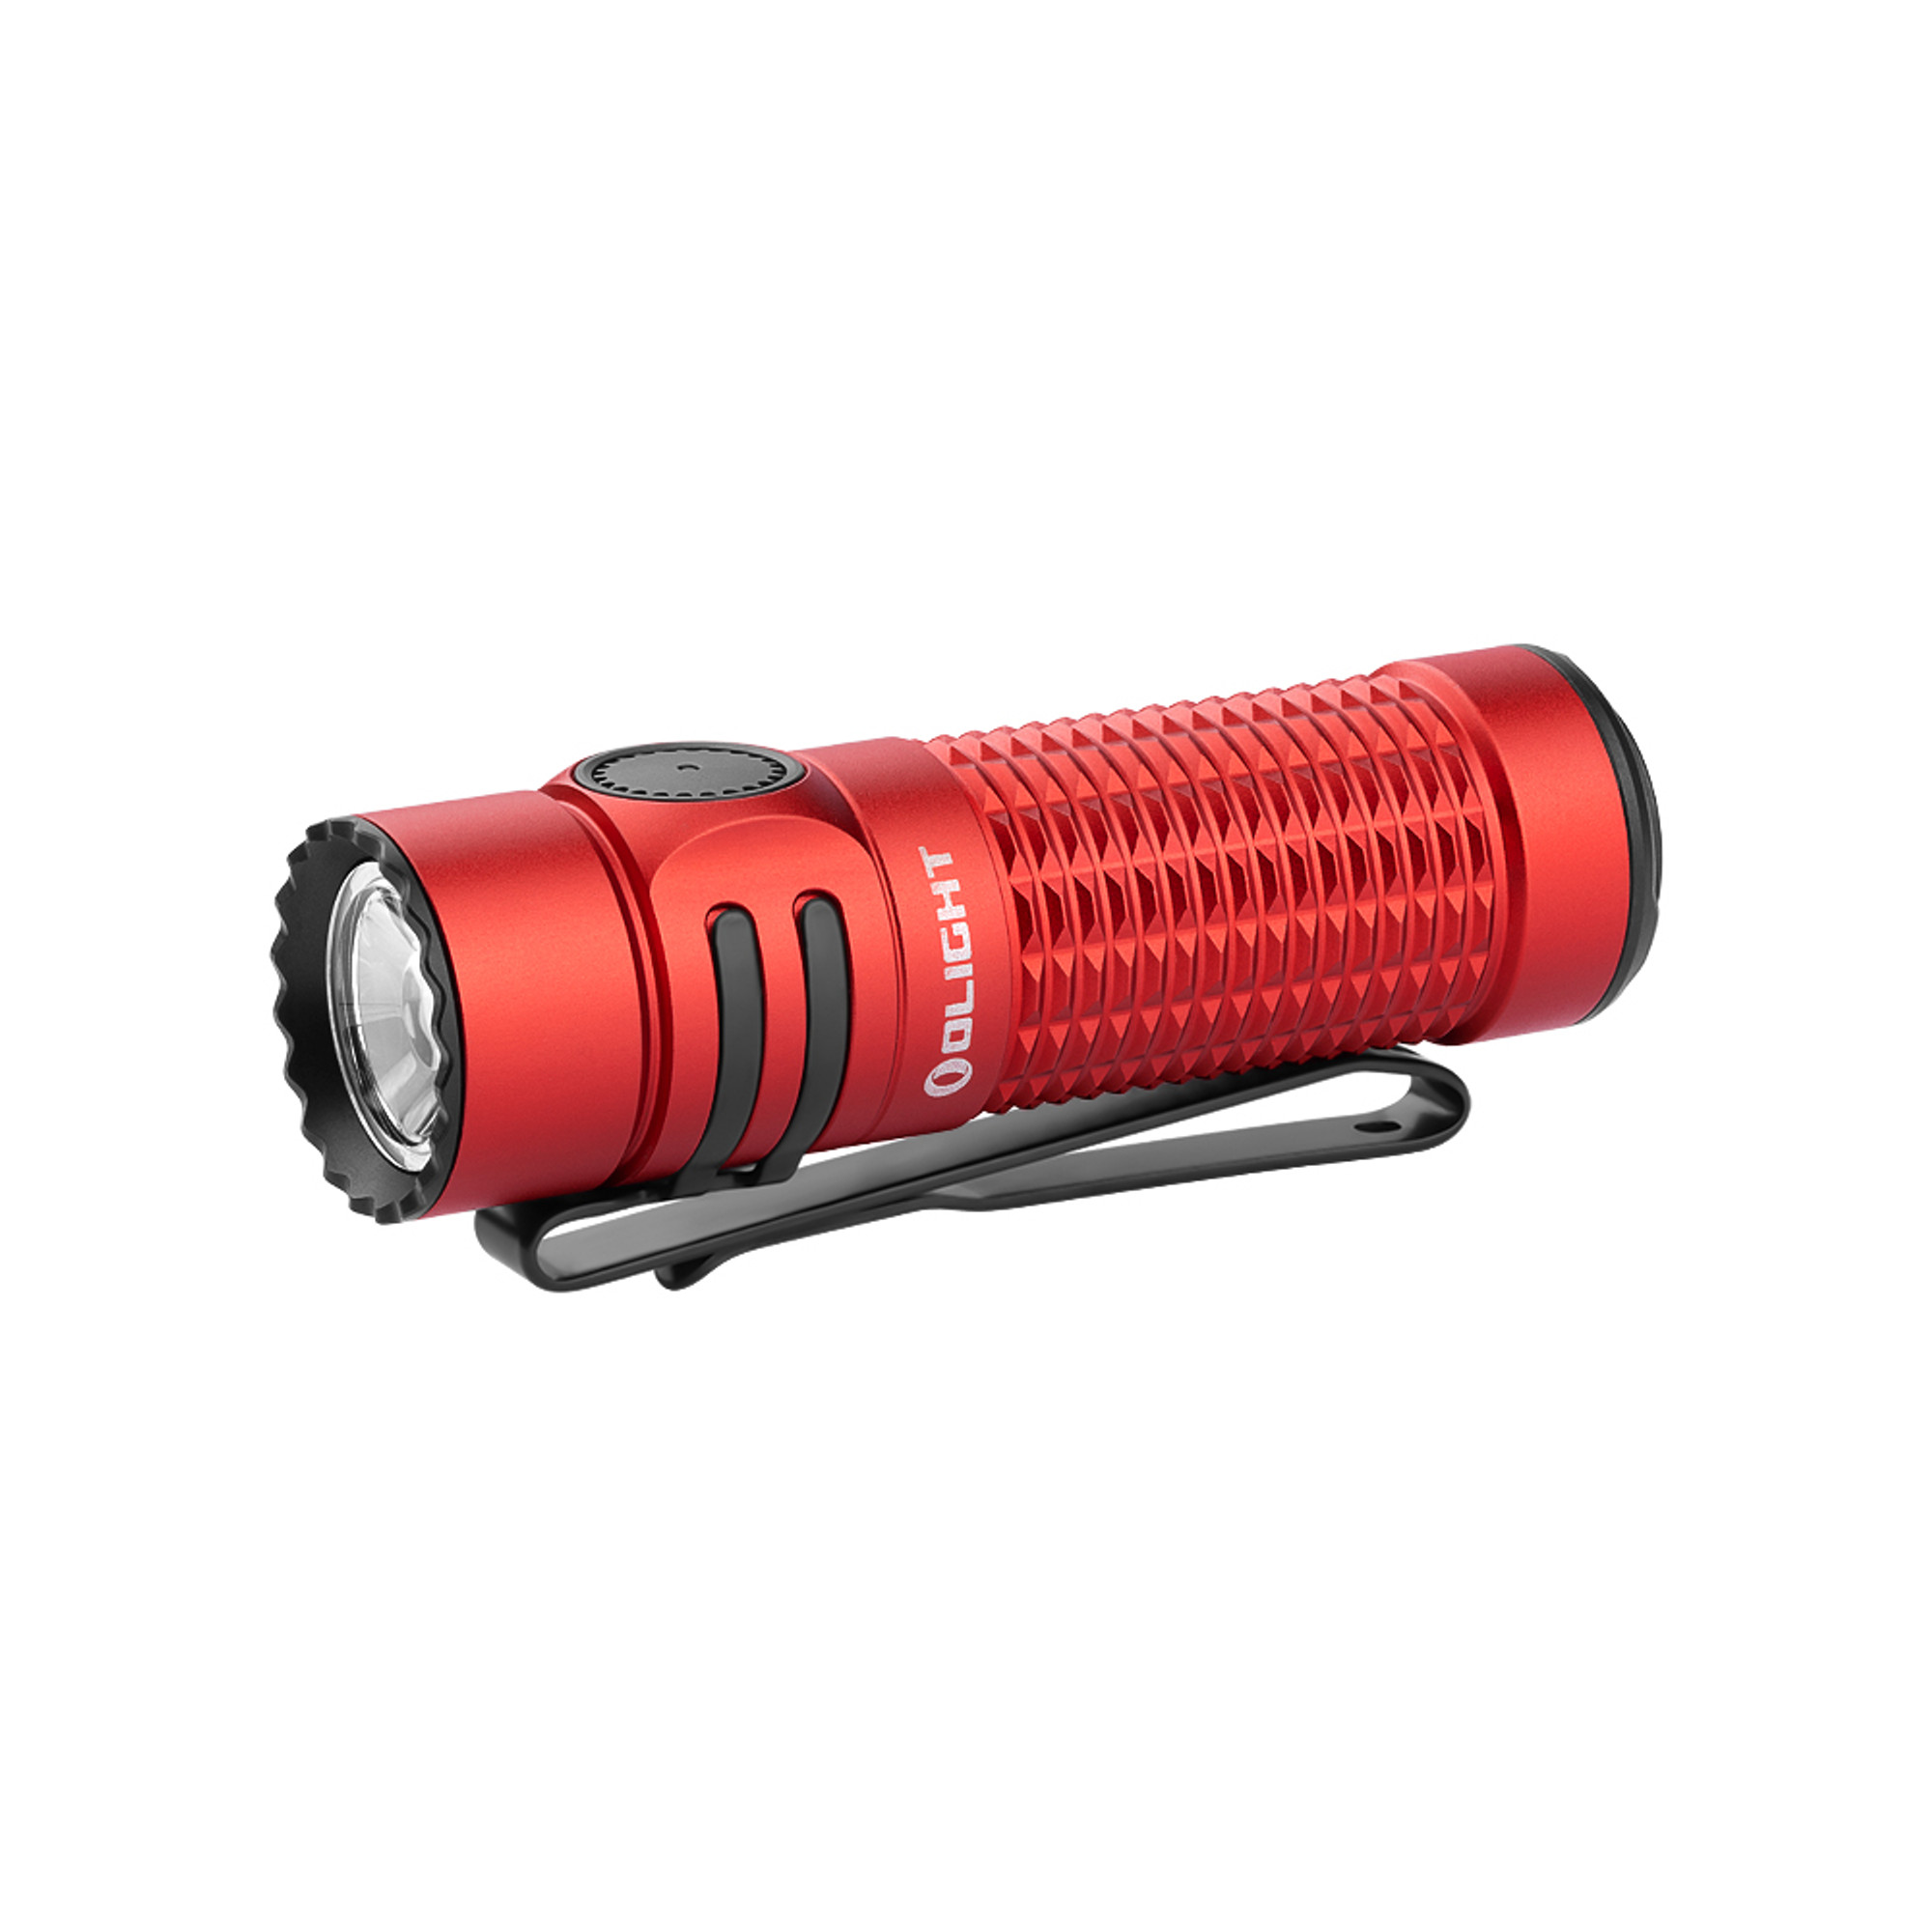 Olight Warrior Nano's Most Compact Rechargeable Tactical Flashlight - Red